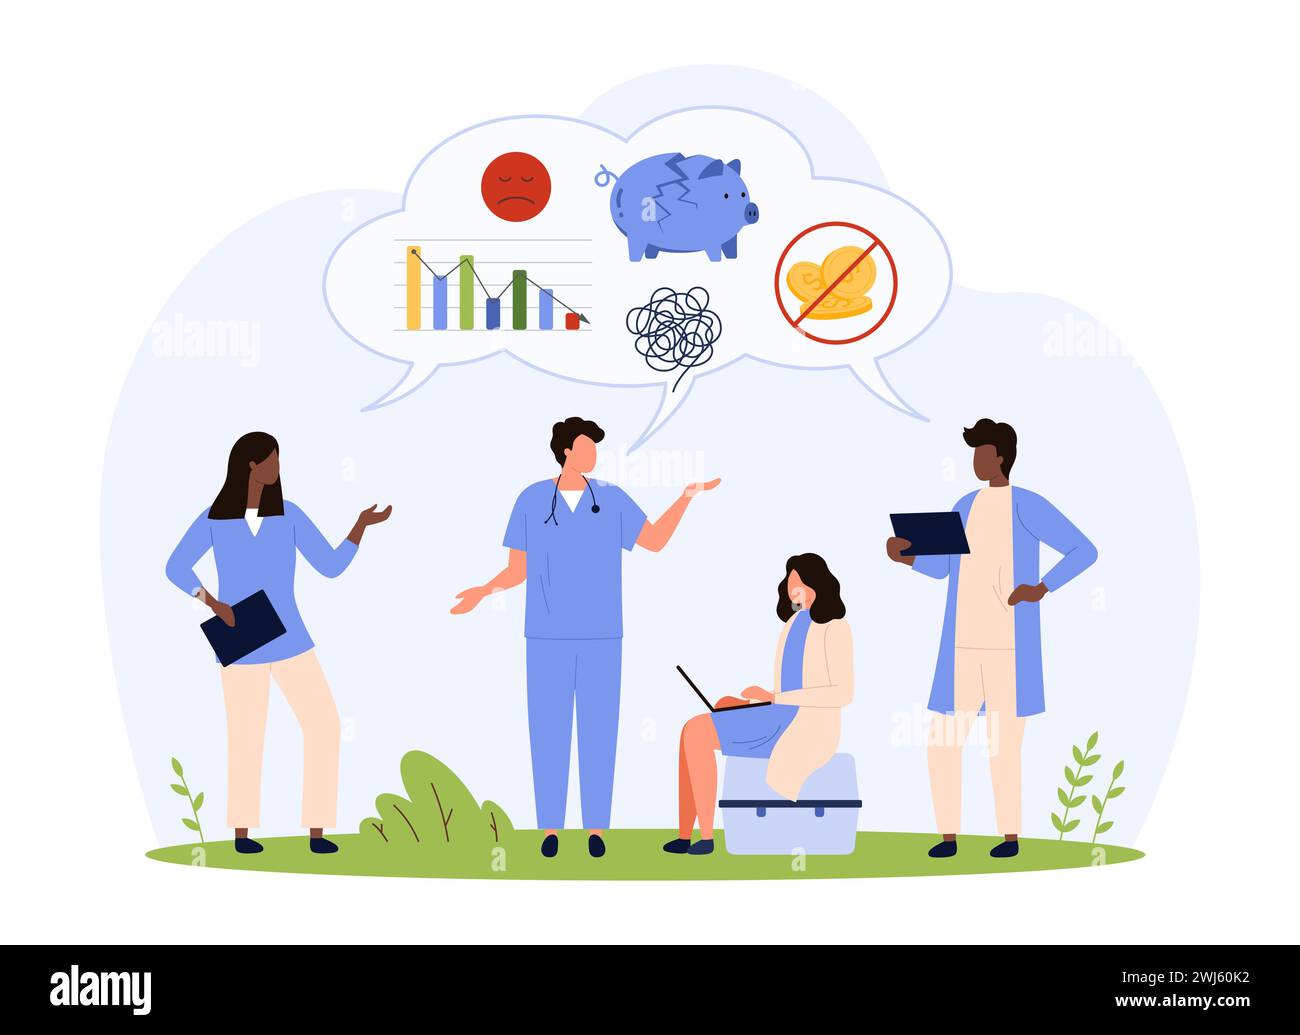 Low wages and income reductions for medical professional workers, hospital staff workforce shortage. Tiny doctors and nurses in uniforms in salary crisis and stress cartoon vector illustration Stock Vector